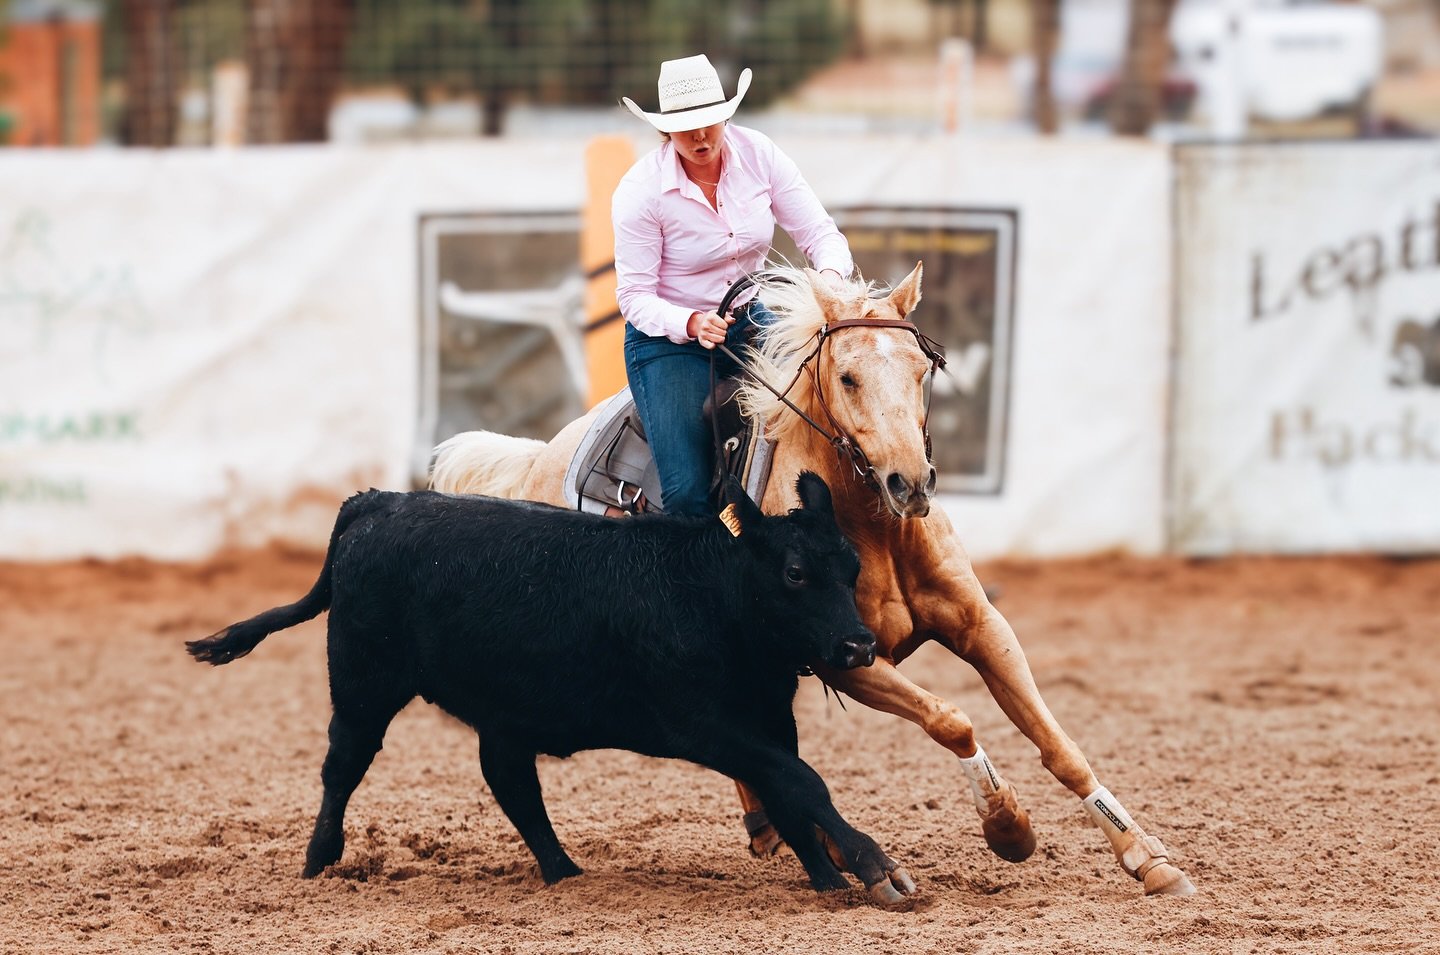 What a weekend! 

Riverina Cow Horse wrapped up today and what a fantastic show it was.
A massive props to Emma and Troy for putting on a great event, your hard work definitely didn&rsquo;t go unnoticed!

Photos will be up this week, please keep your